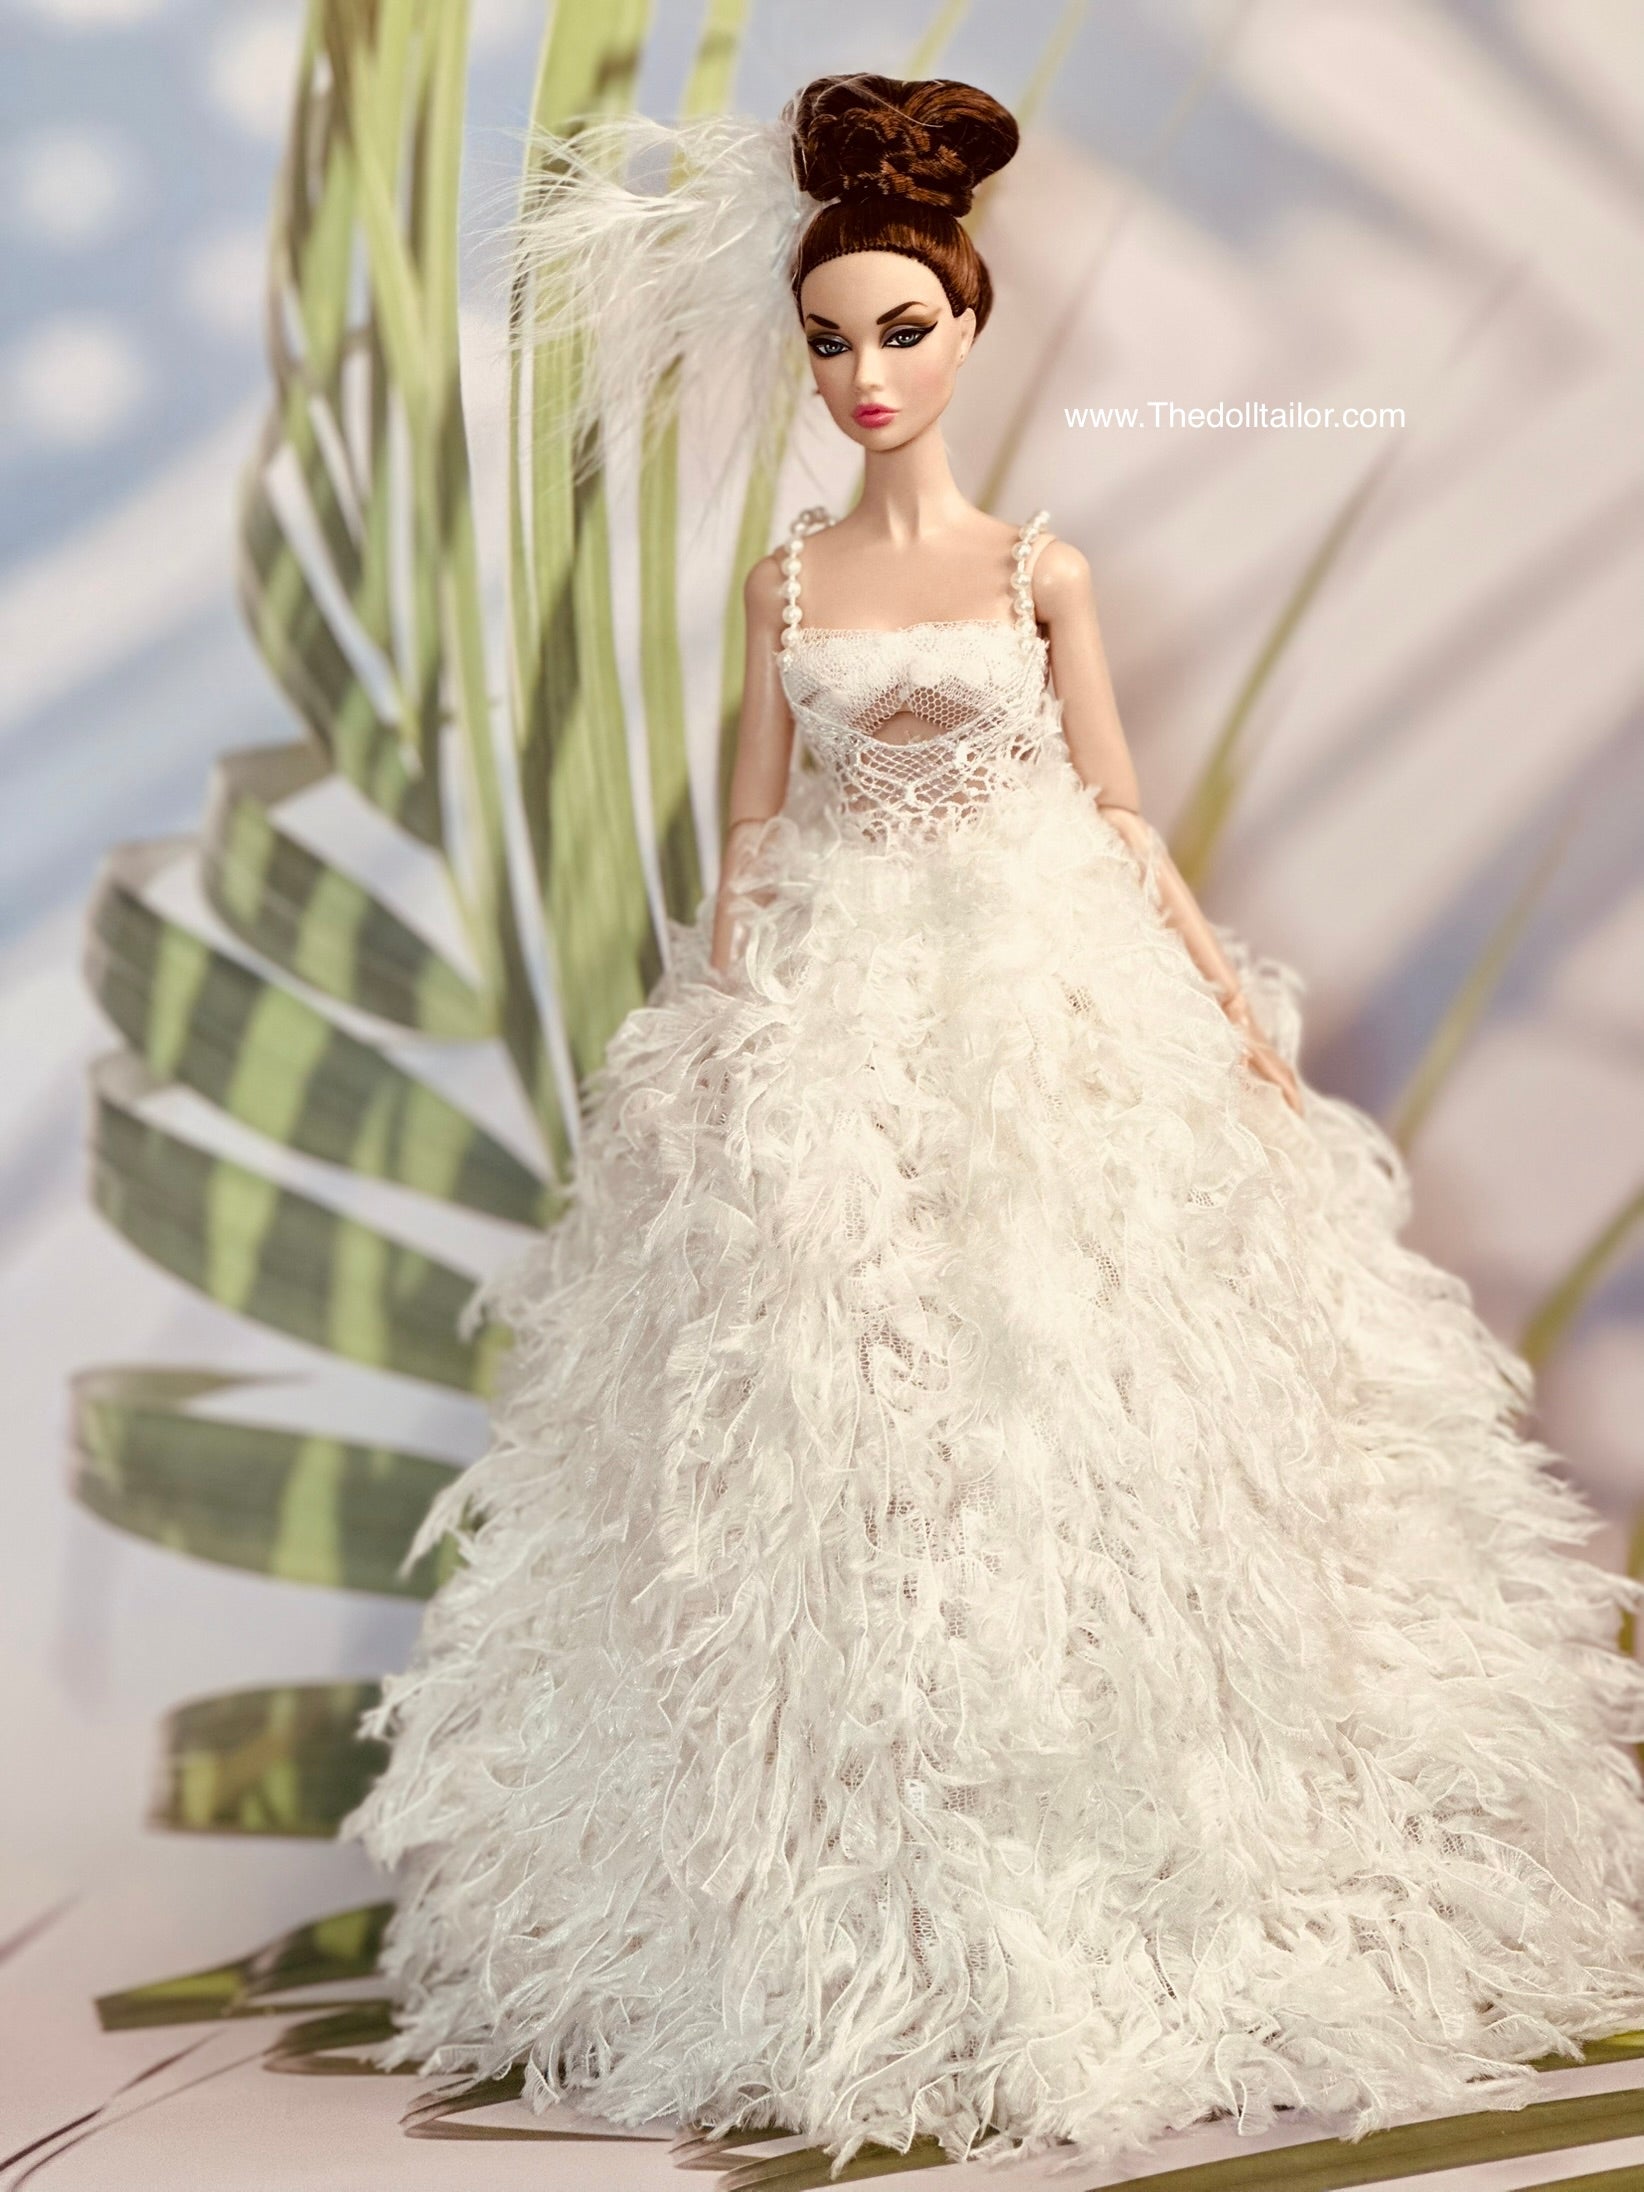 2016 Platinum Chiffon Ball Gown Barbie (2) | Draped in flowi… | Flickr